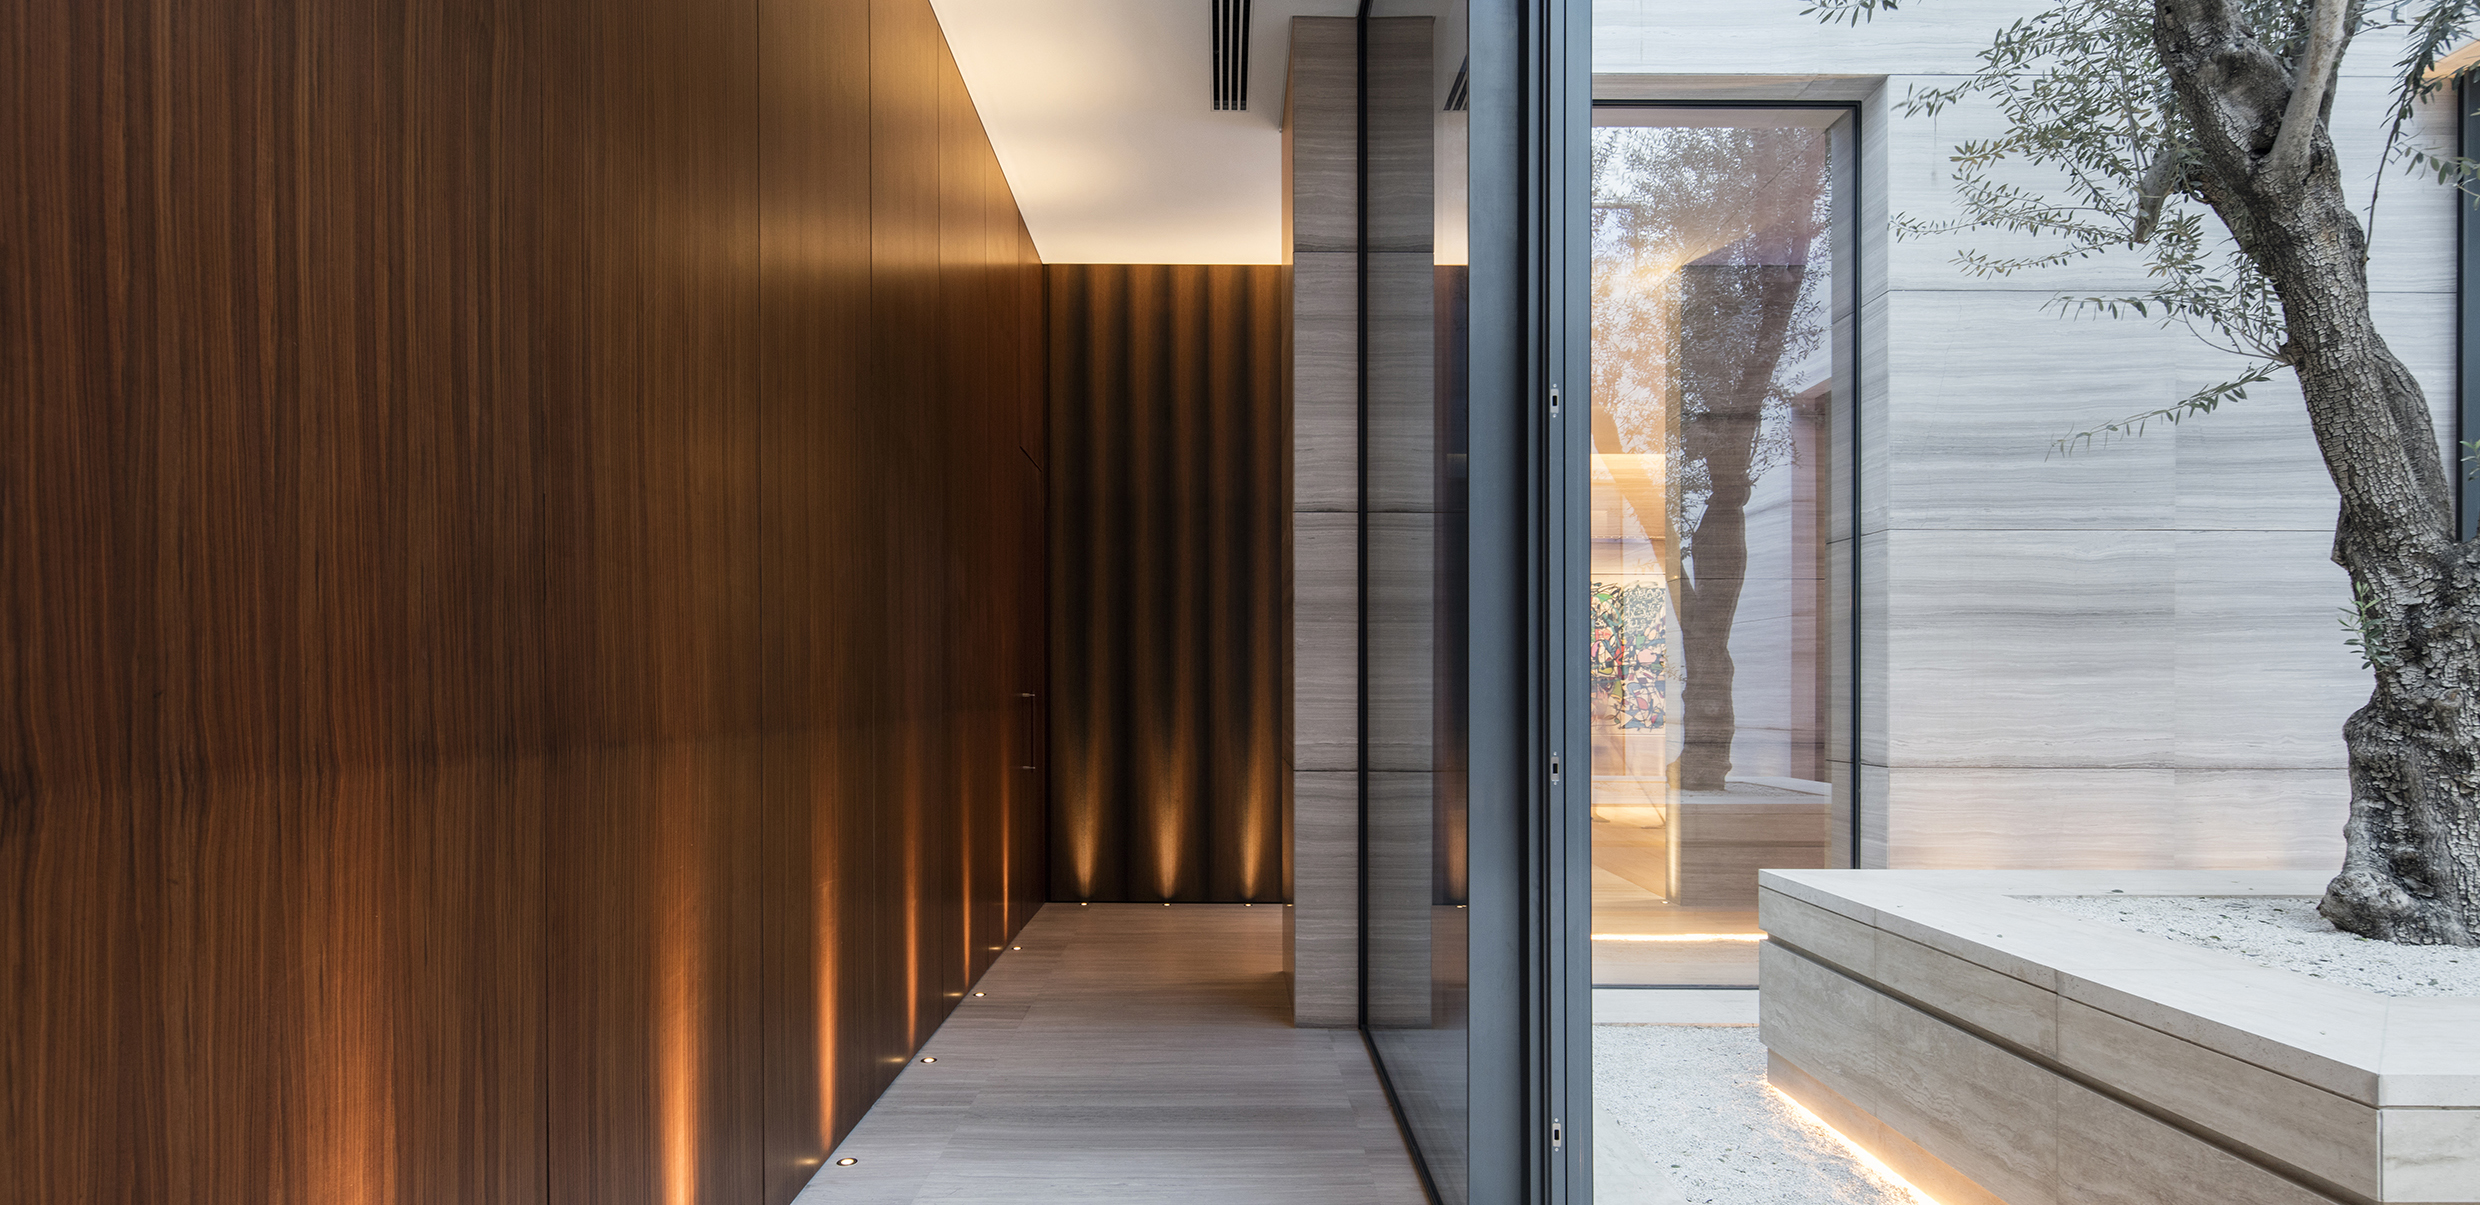 Wooden clad corridor with uplights and floating planter outside